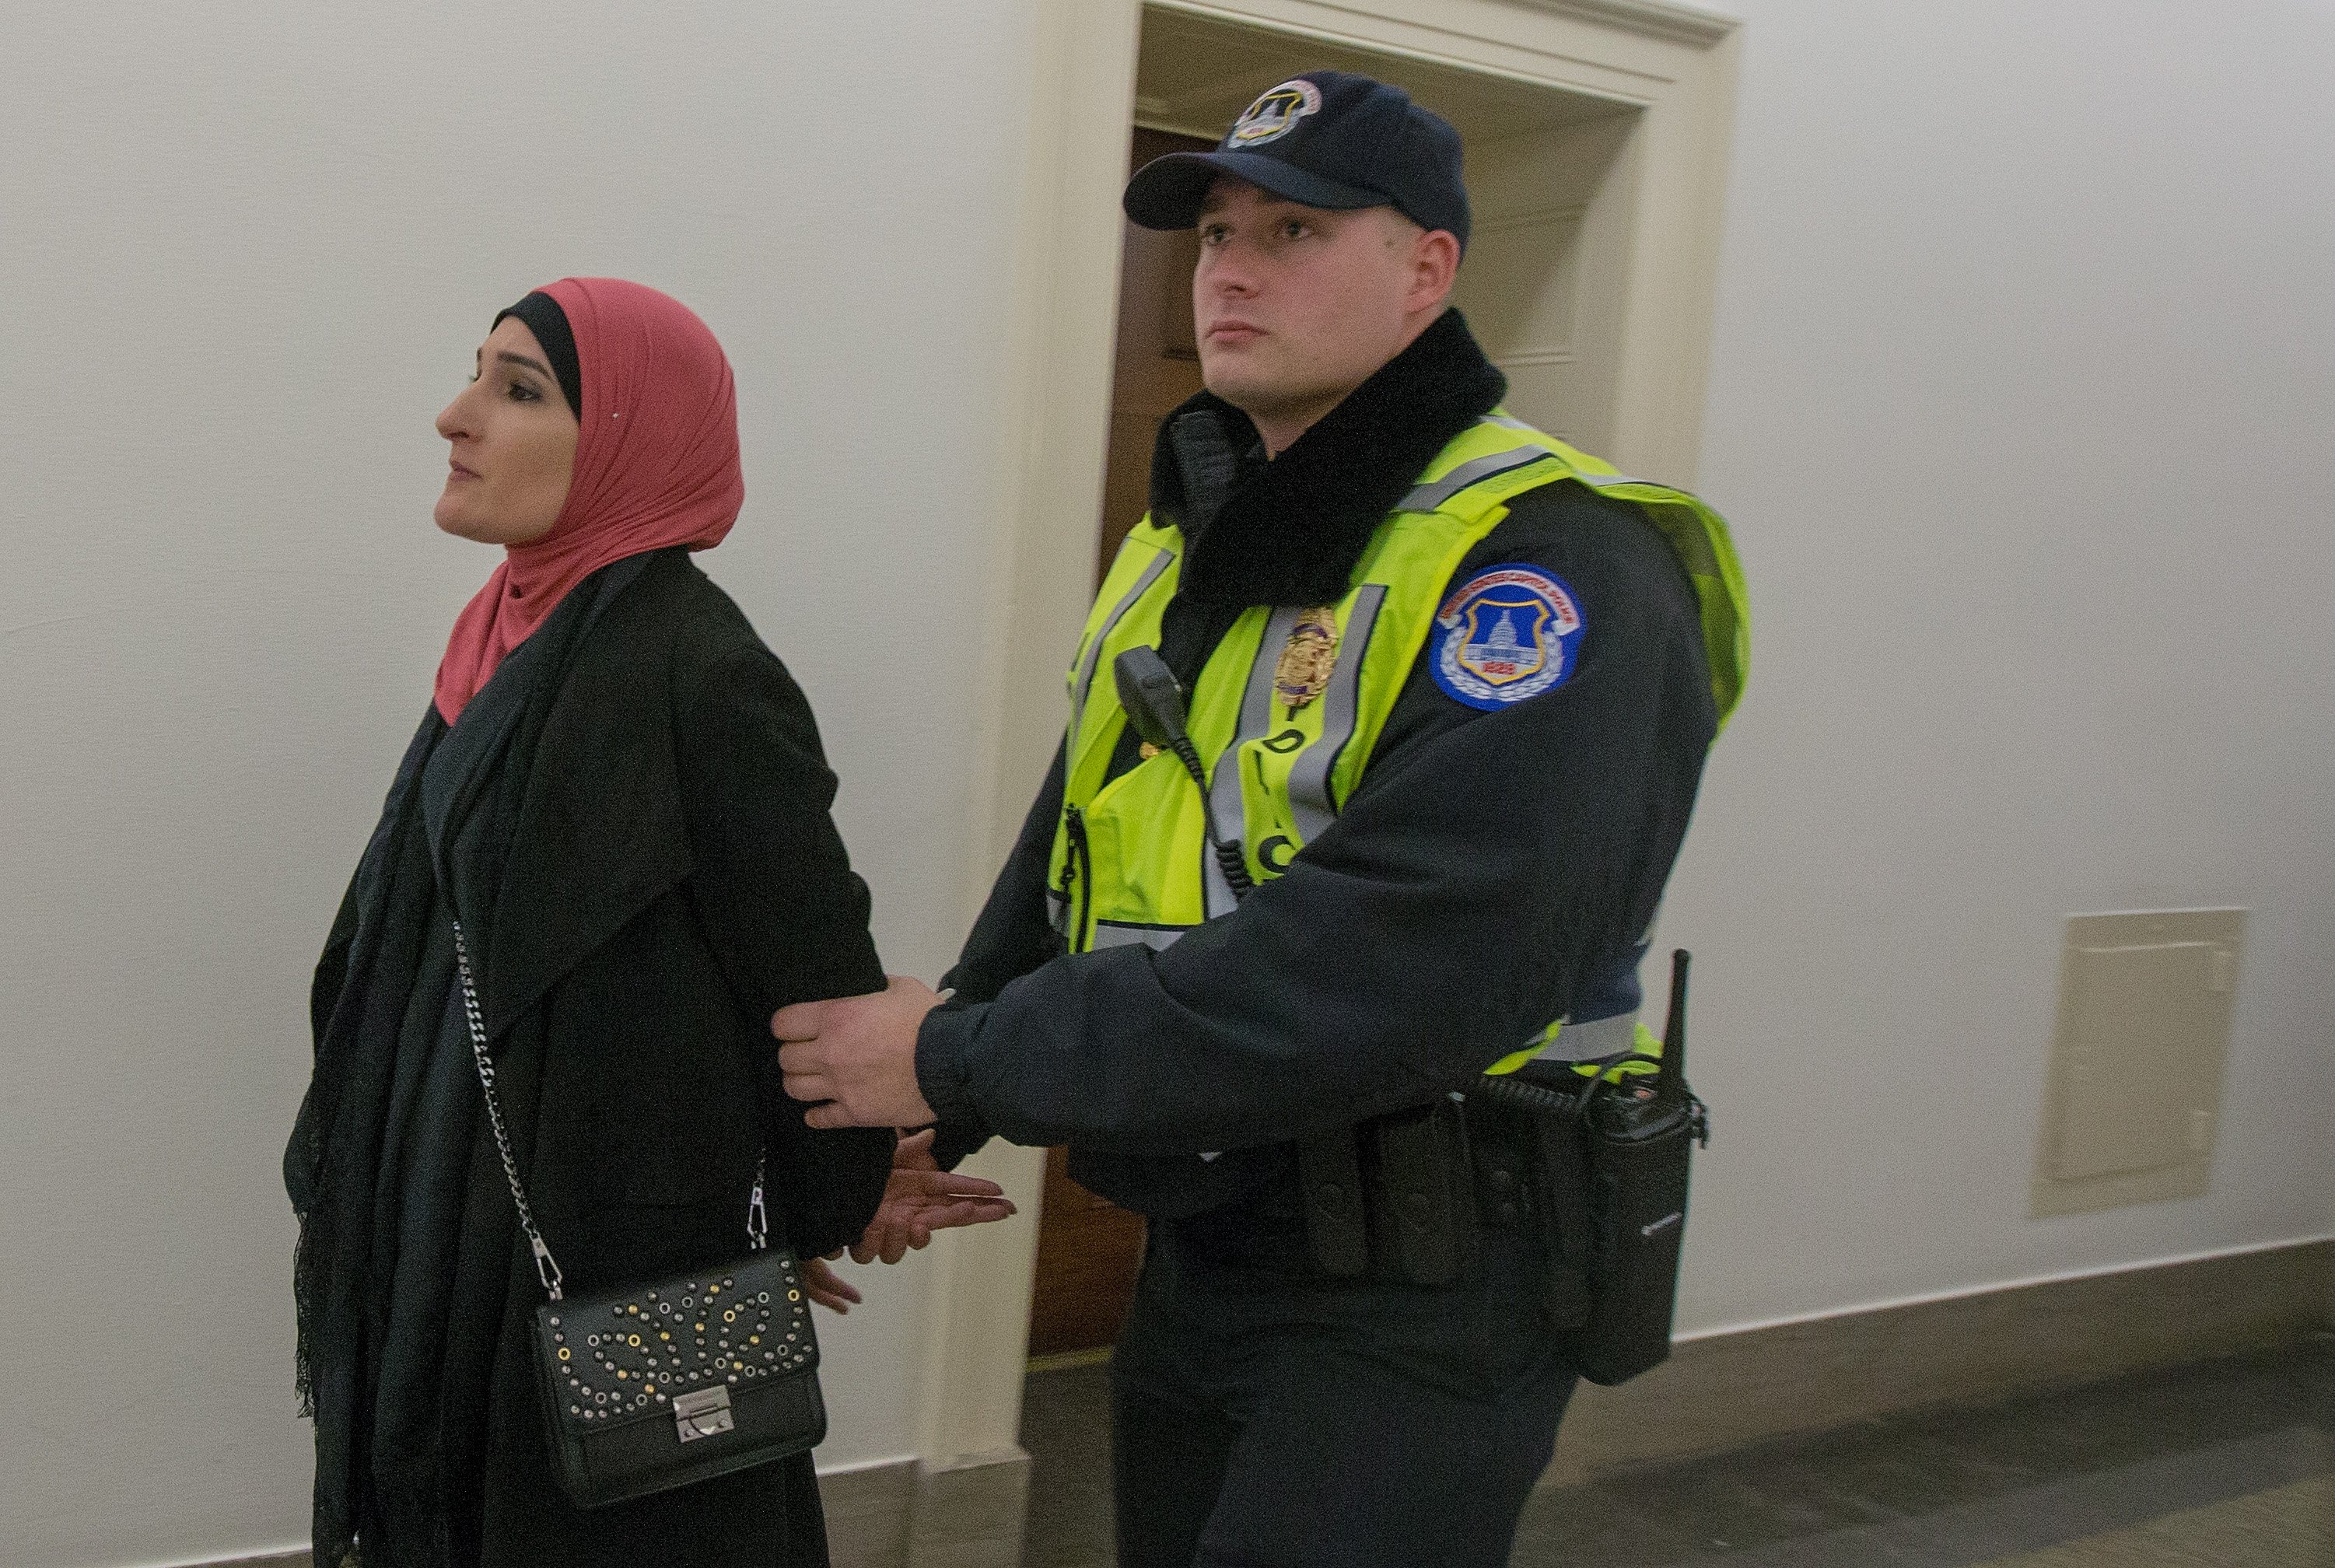 Linda Sarsour protests in favor of DACA and Dreamers outside the office of Paul Ryan. (Photo by Tasos Katopodis/Getty Images for MoveOn.org)